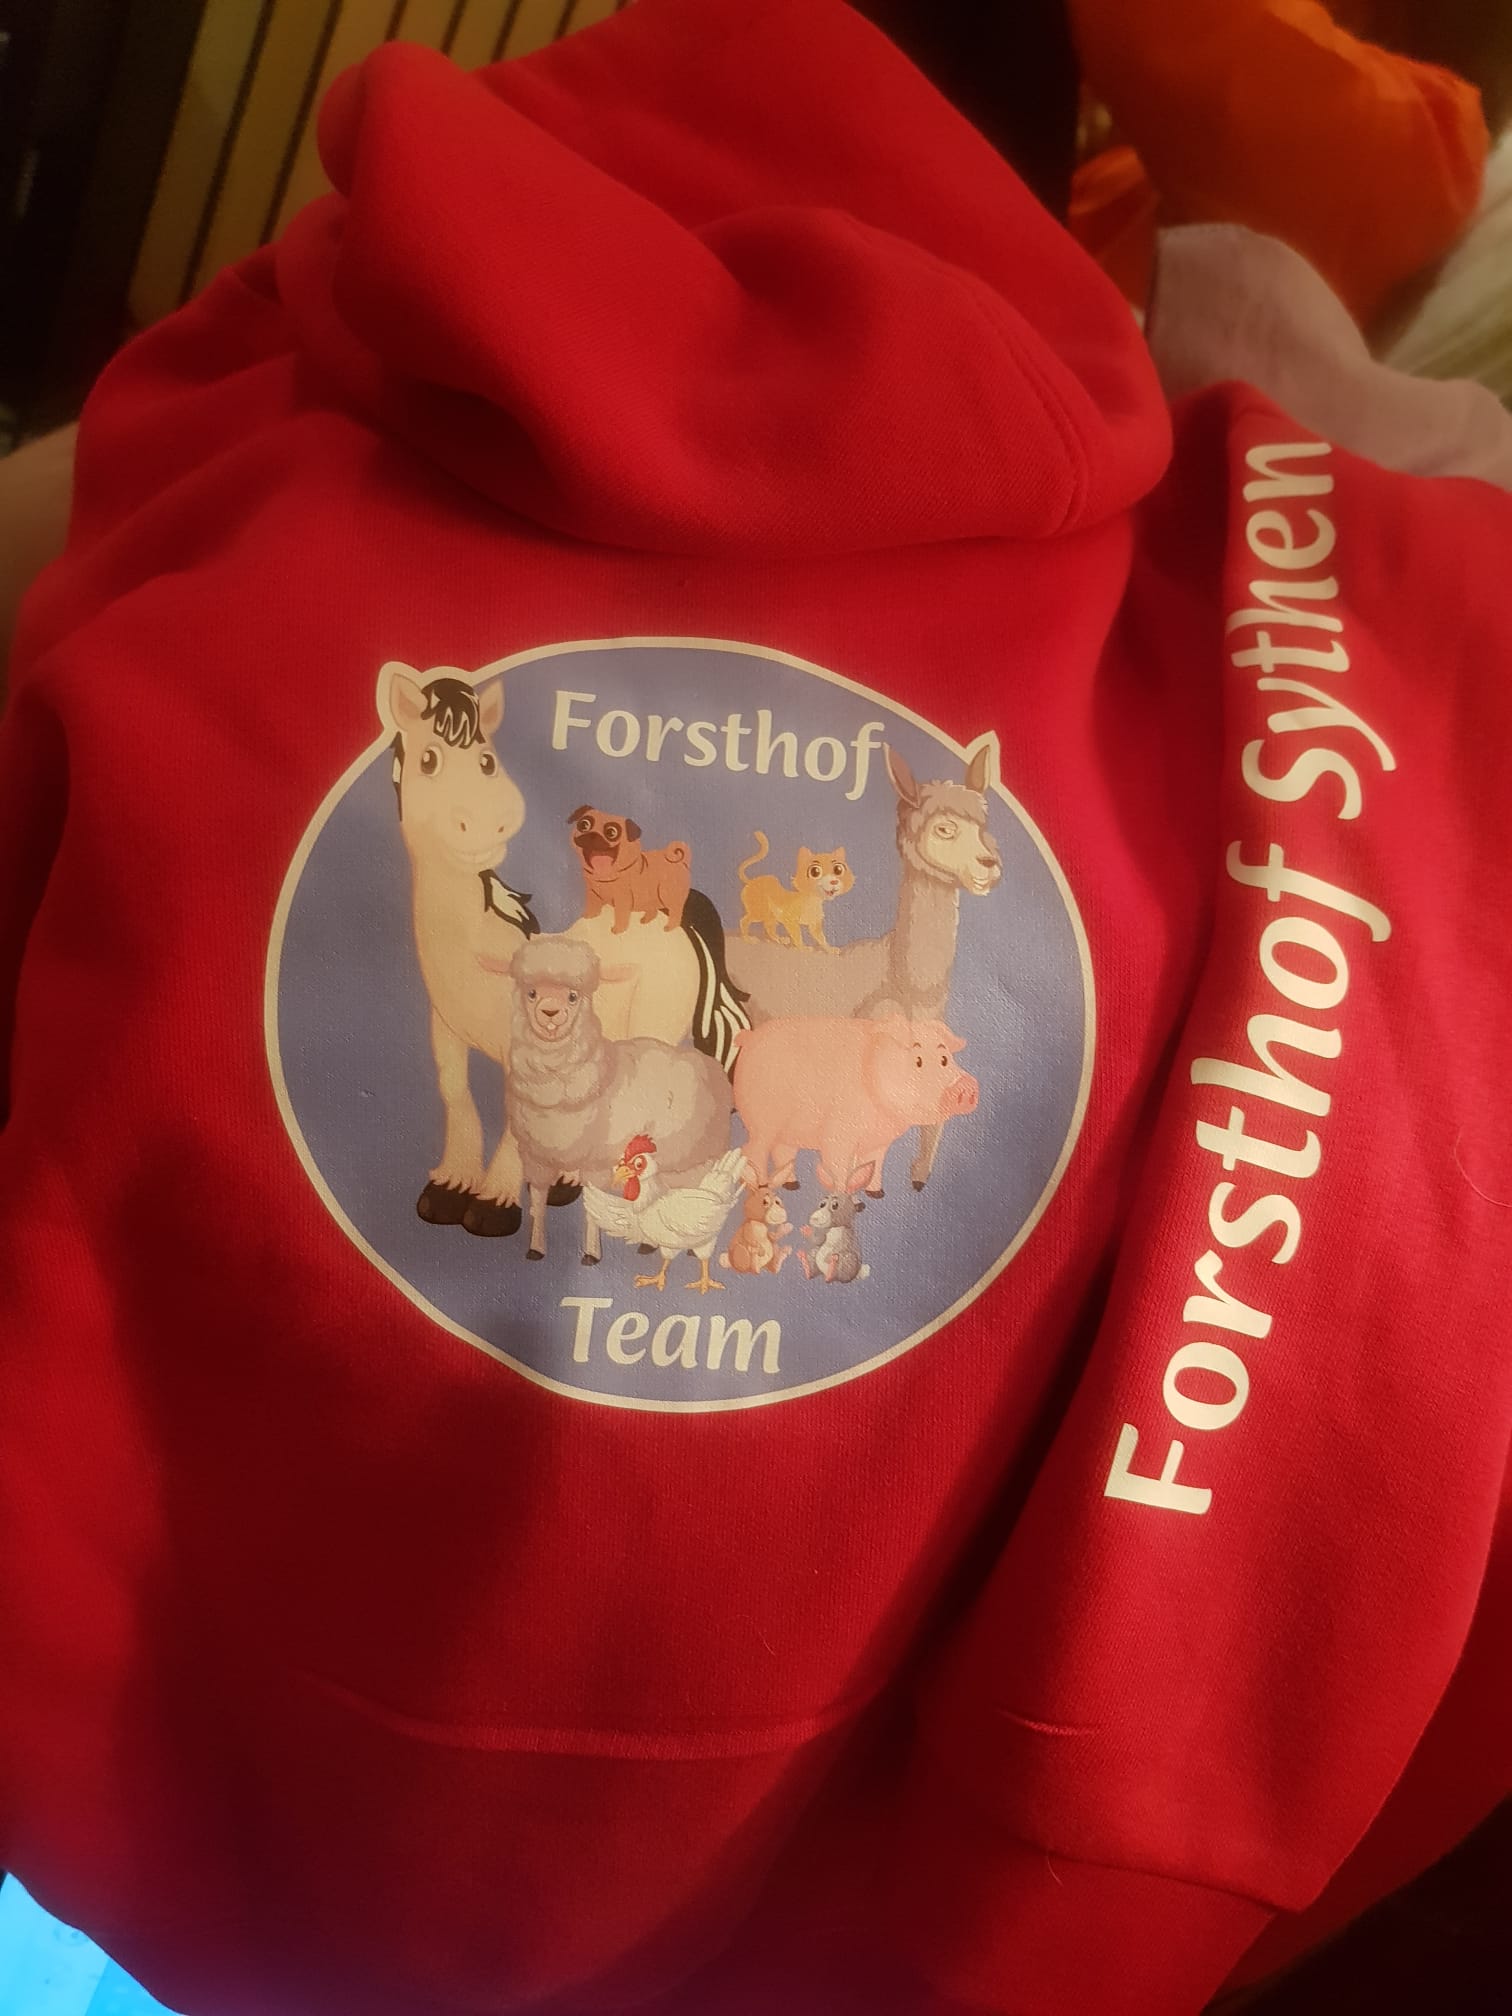 Forsthofhoodies